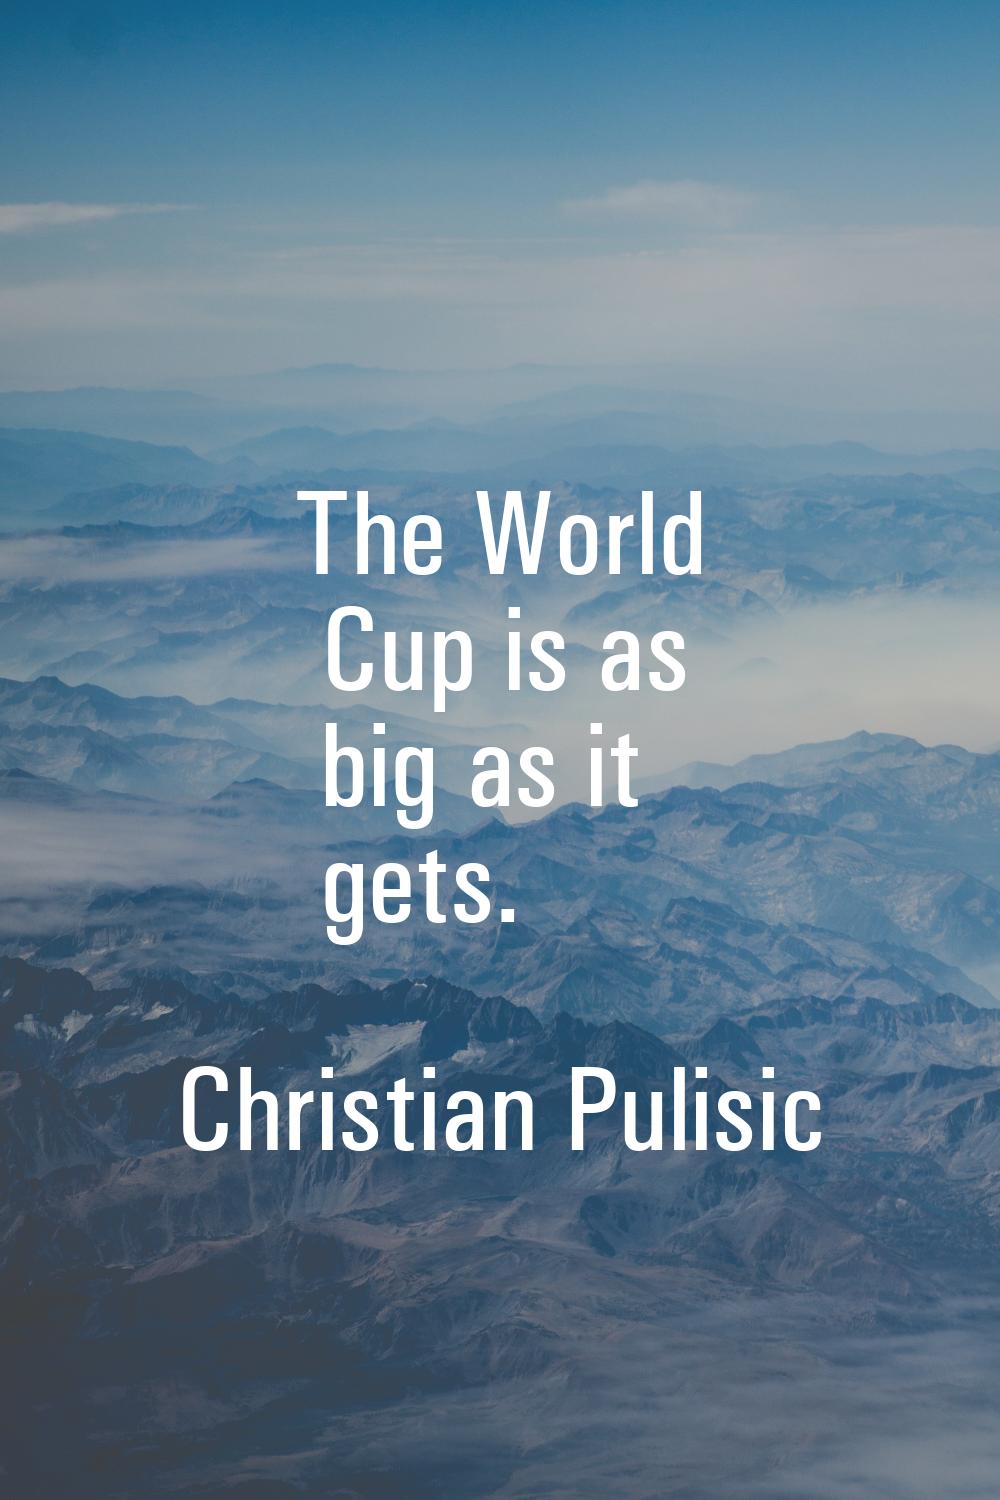 The World Cup is as big as it gets.